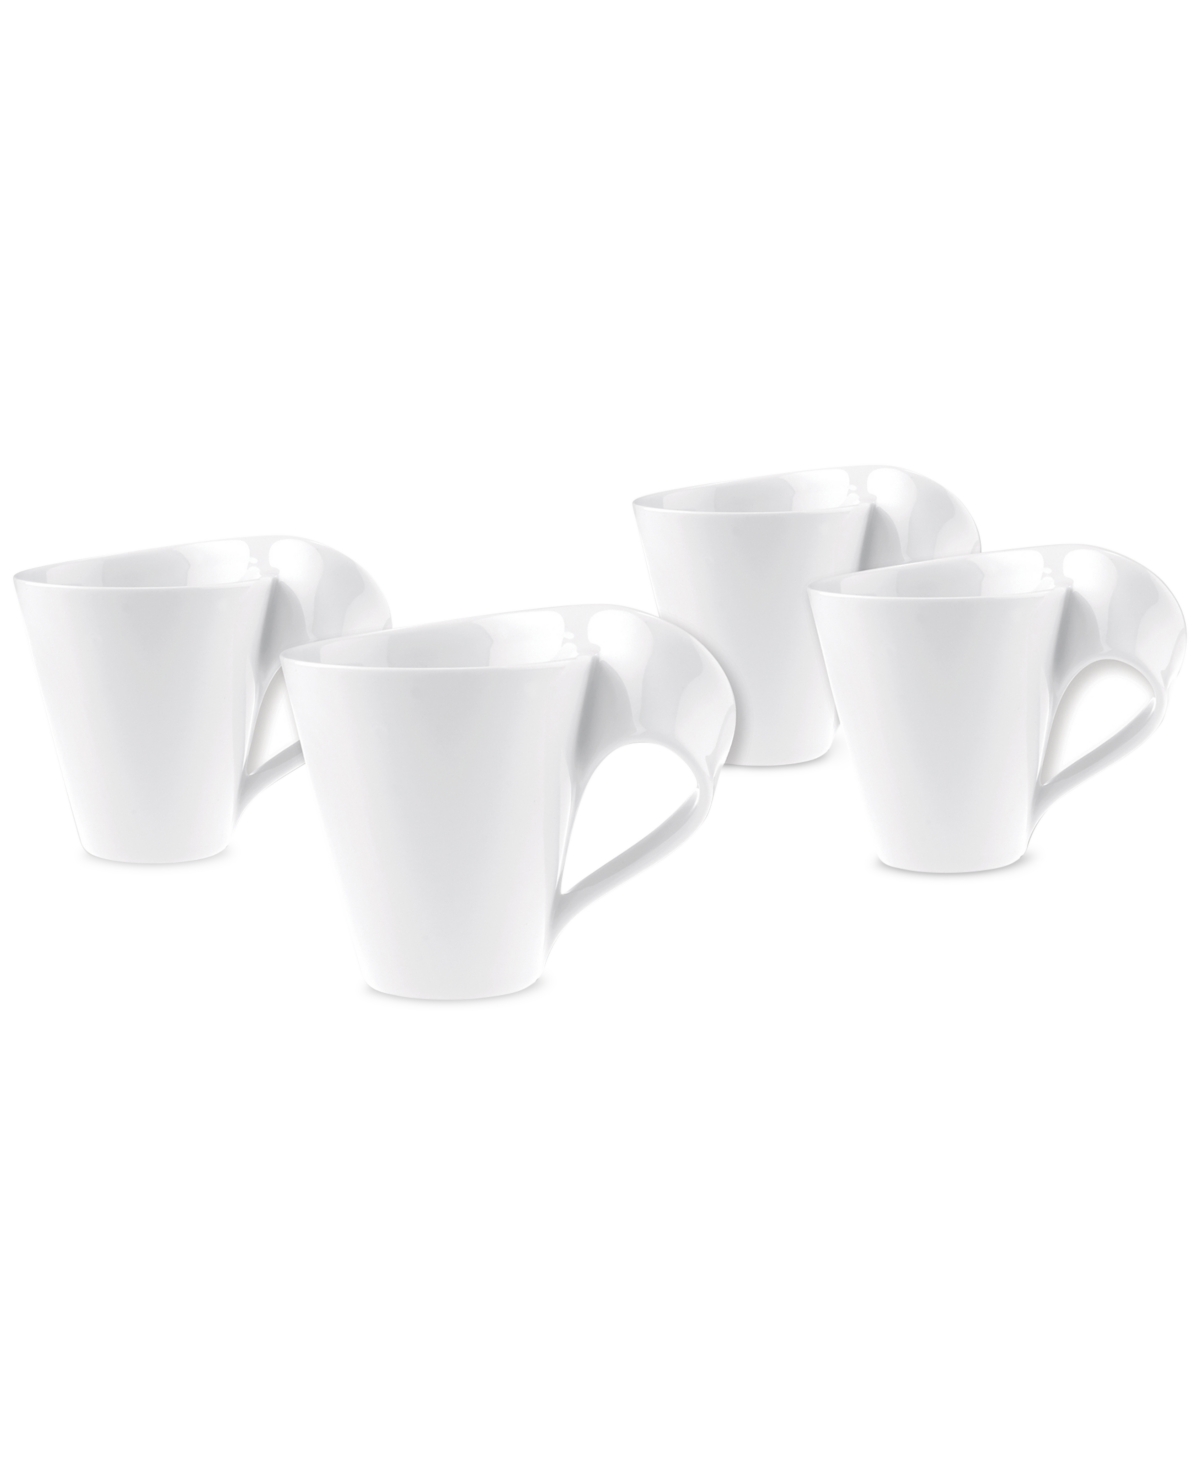 New Wave Collection 4-Pc. Mug Set, Created for Macy's - White